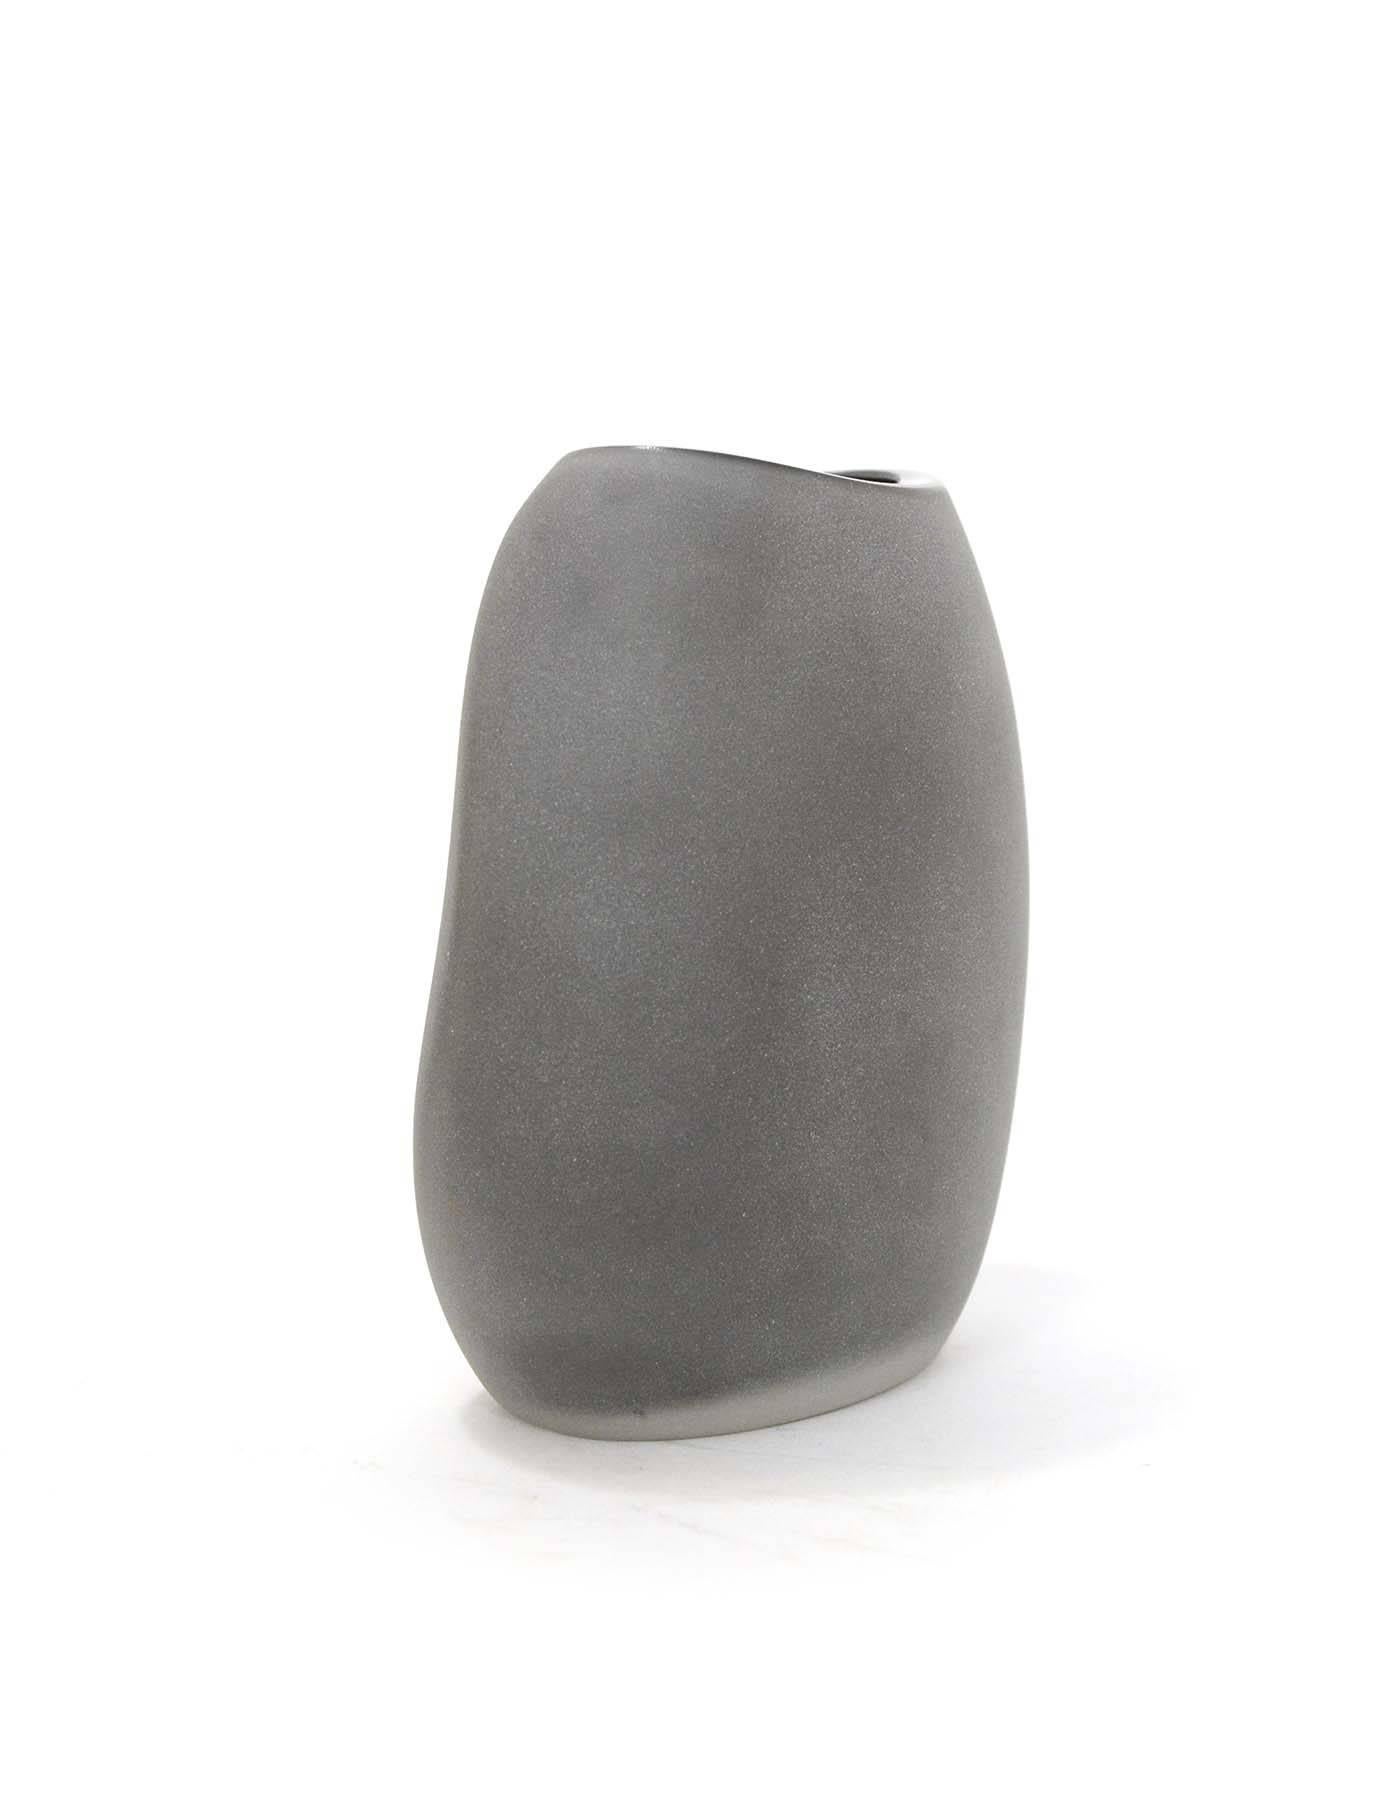 Hermes Small Grey Ceramic Vase
Color: Grey
Materials: Ceramic
Stamp: Hermes
Overall Condition: Excellent pre-owned condition
Includes: Hermes box and pouch
Measurements: 
Width: 2.75